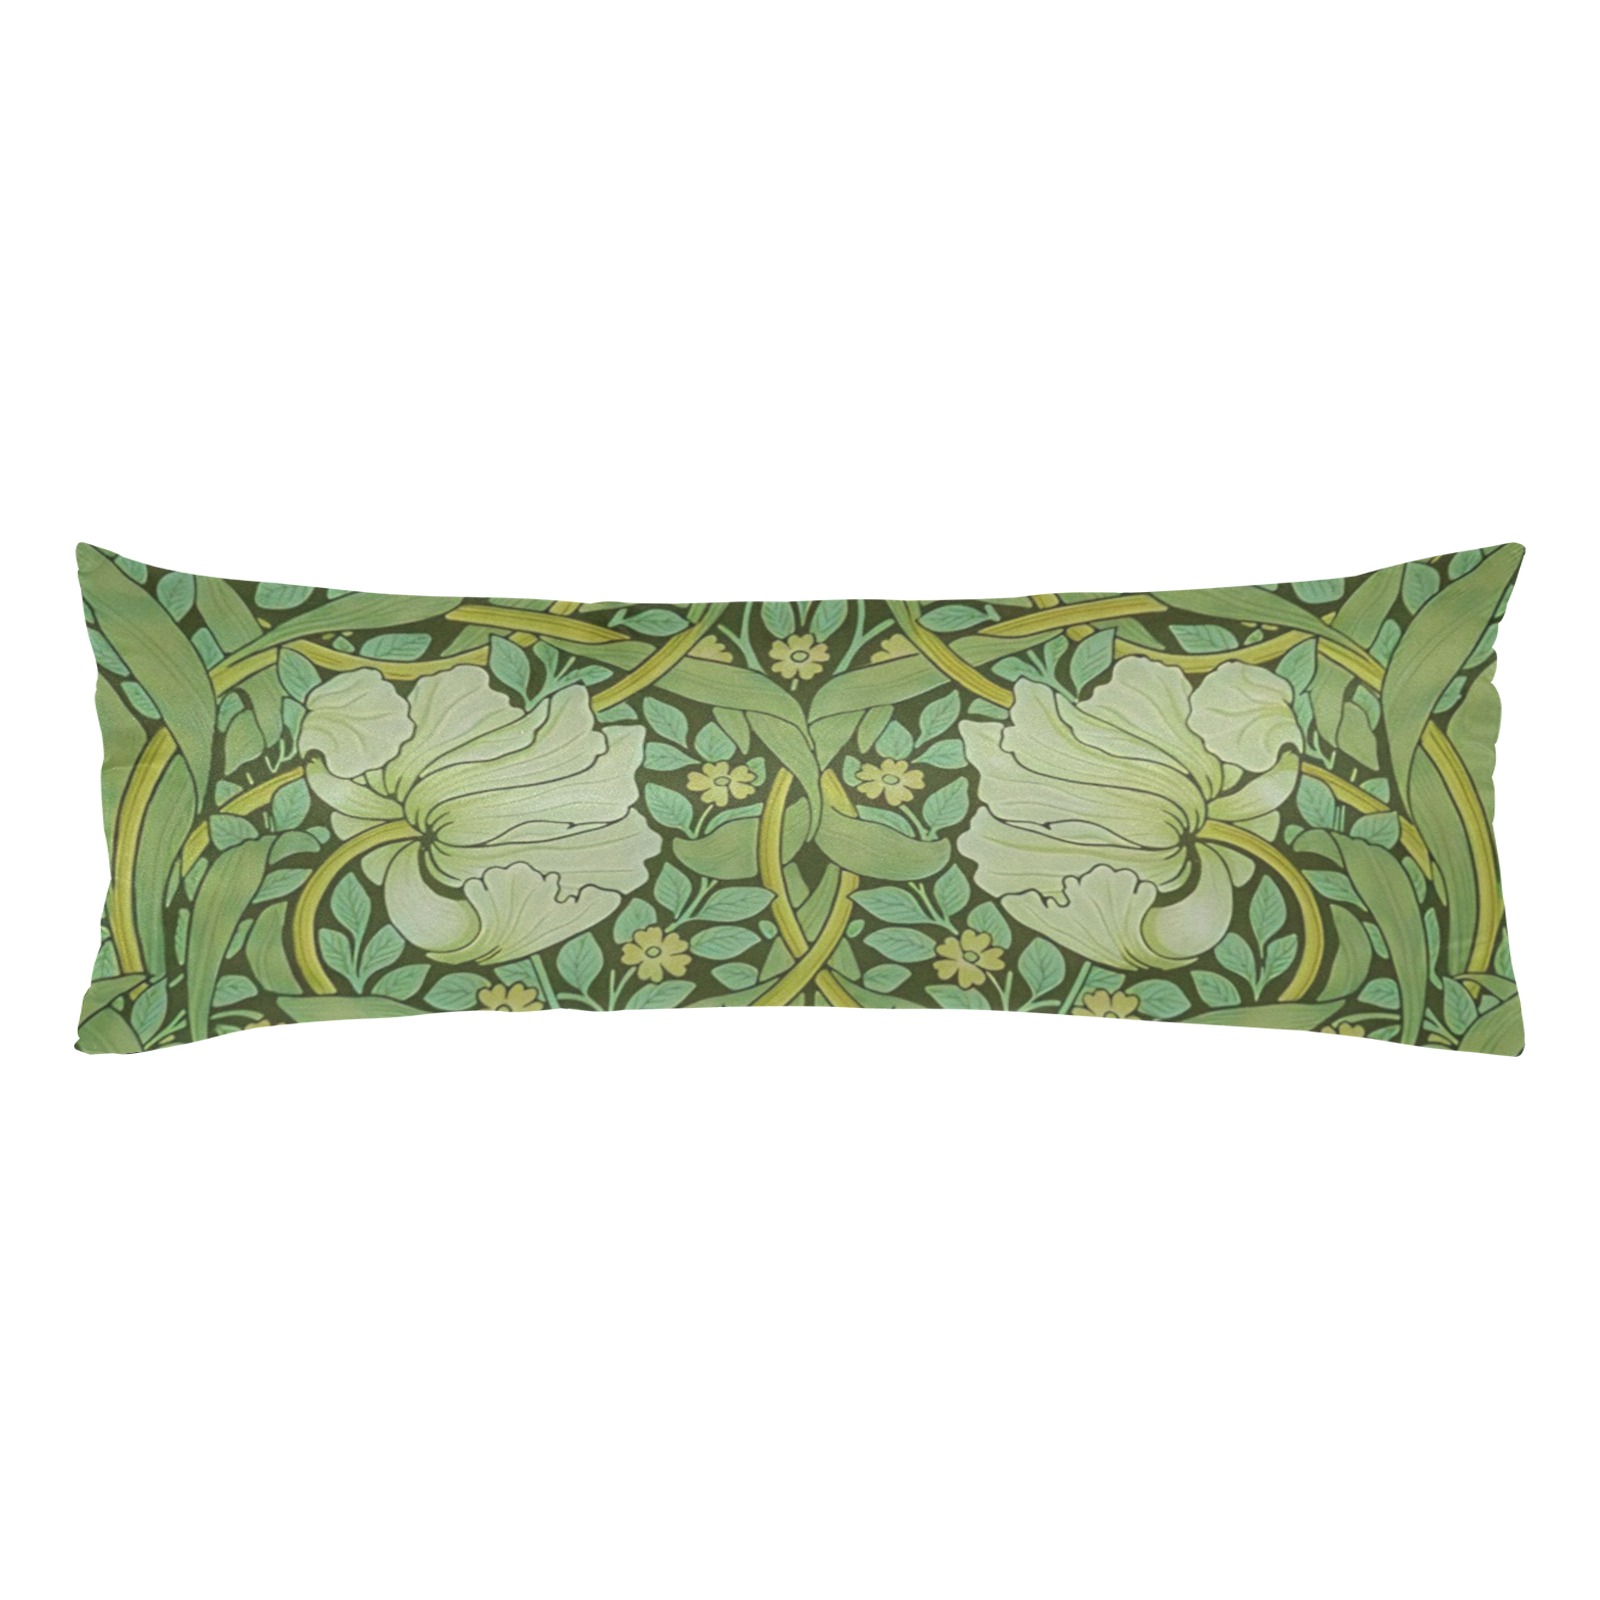 William Morris - Pimpernel Body Pillow Case 20" x 54" (Two Sides)